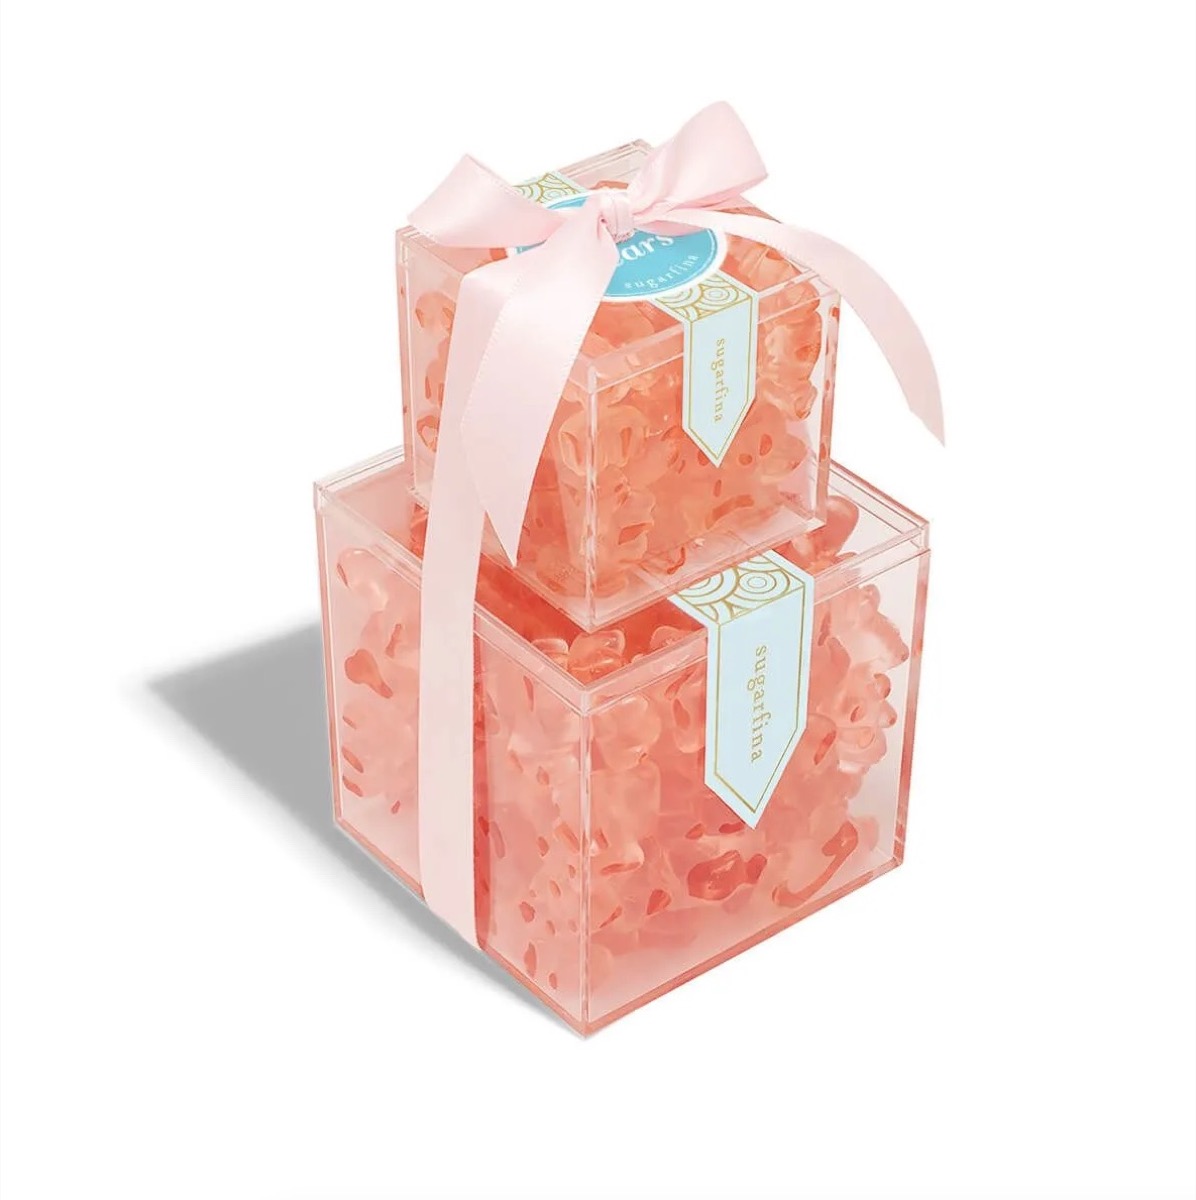 Sugarfina Rose All Day Mother's Day Gifts